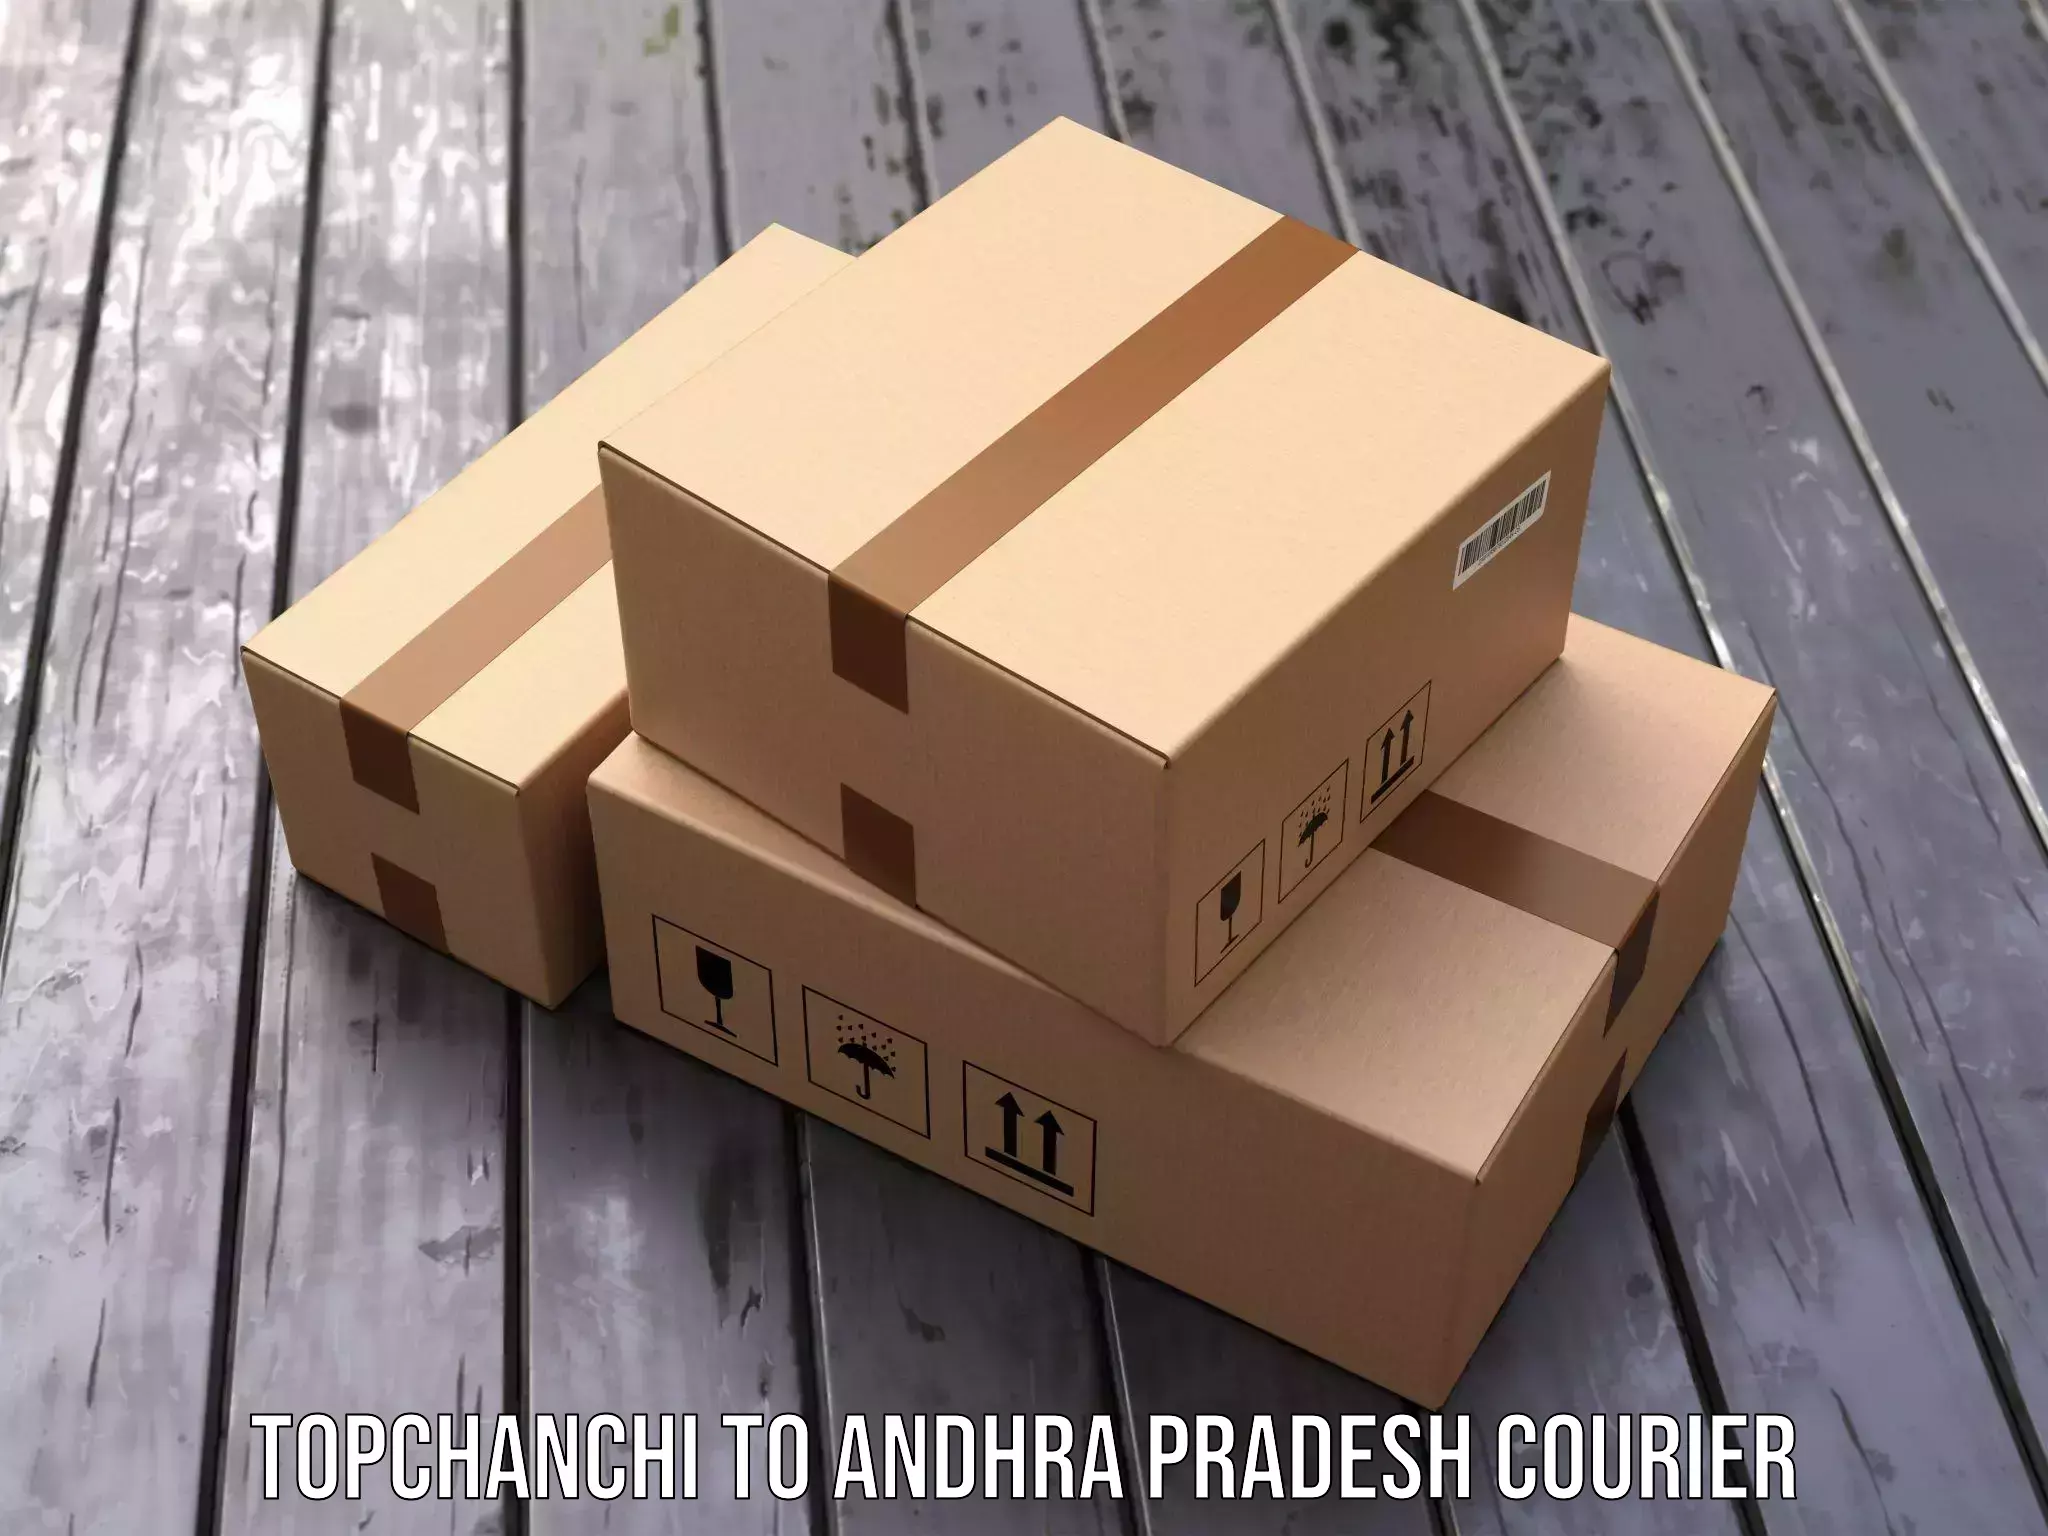 Parcel service for businesses Topchanchi to Podalakur